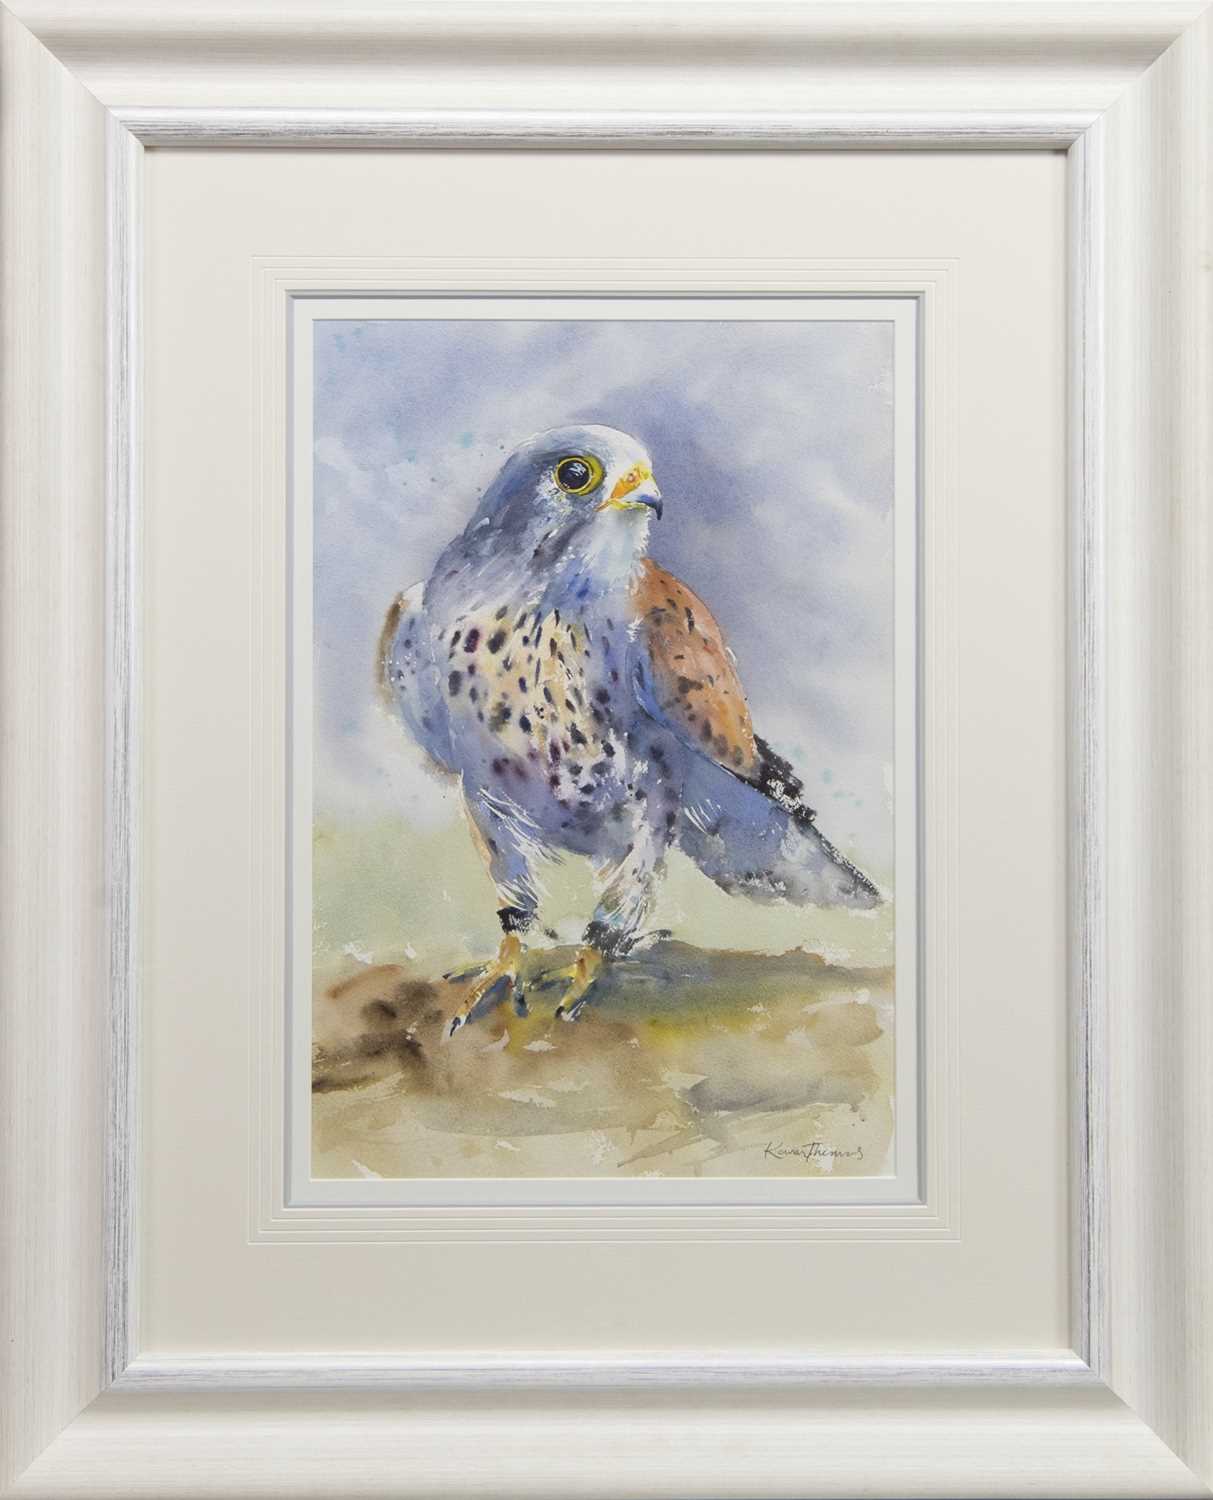 Lot 657 - ON THE LOOKOUT, A WATERCOLOUR BY KAREN THOMAS